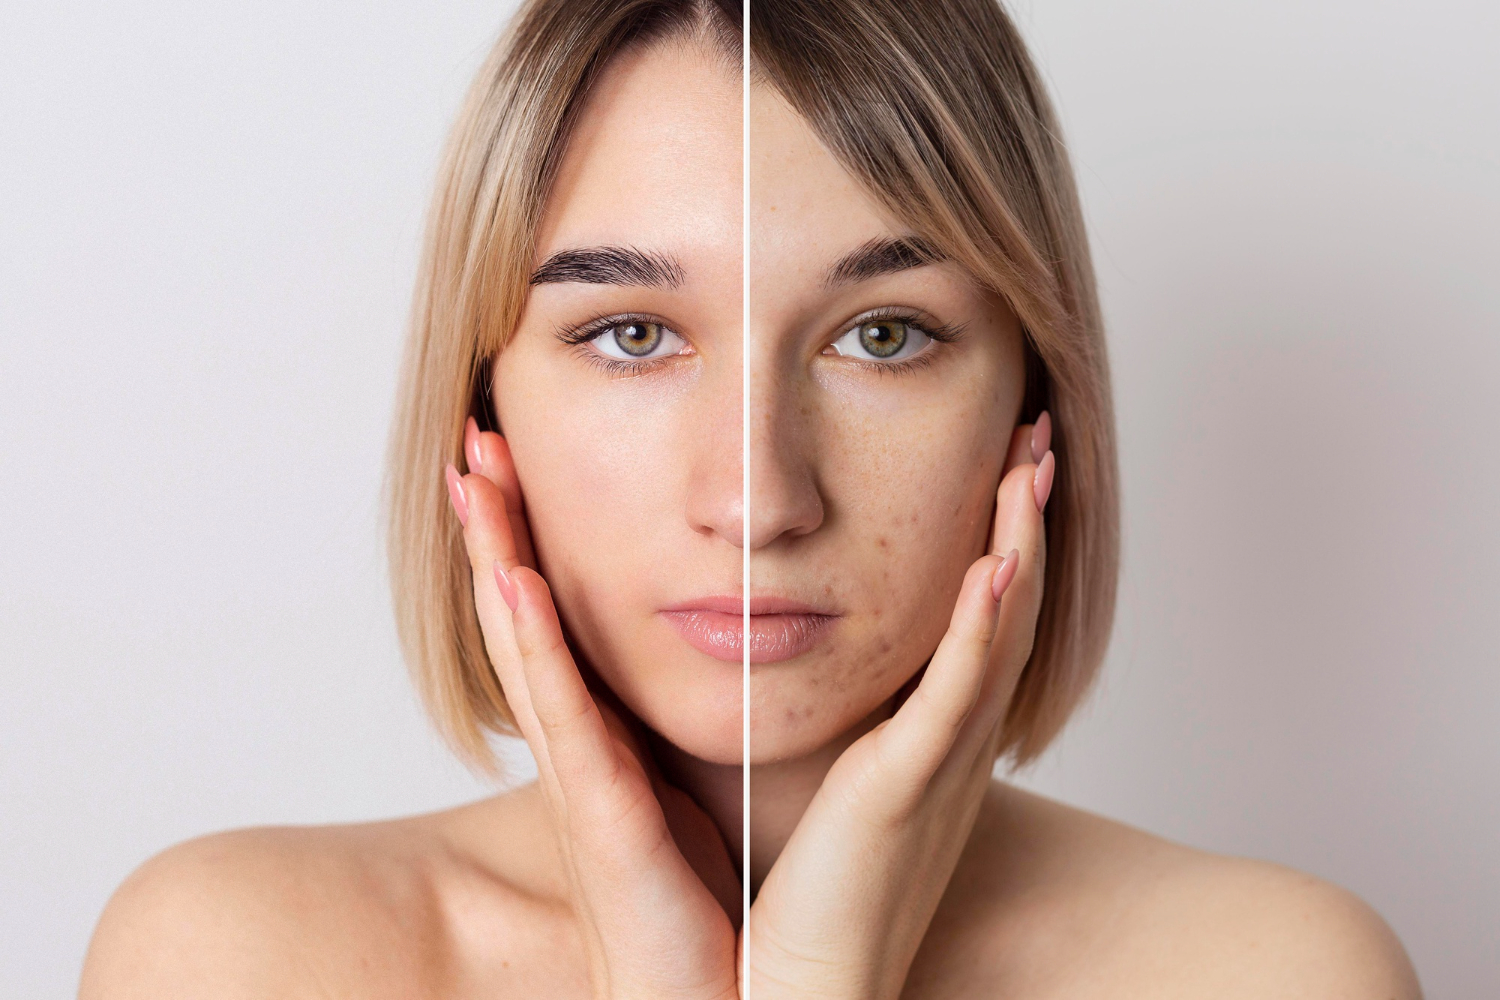 Acne Remedies - How To Find The Right Treatment For You